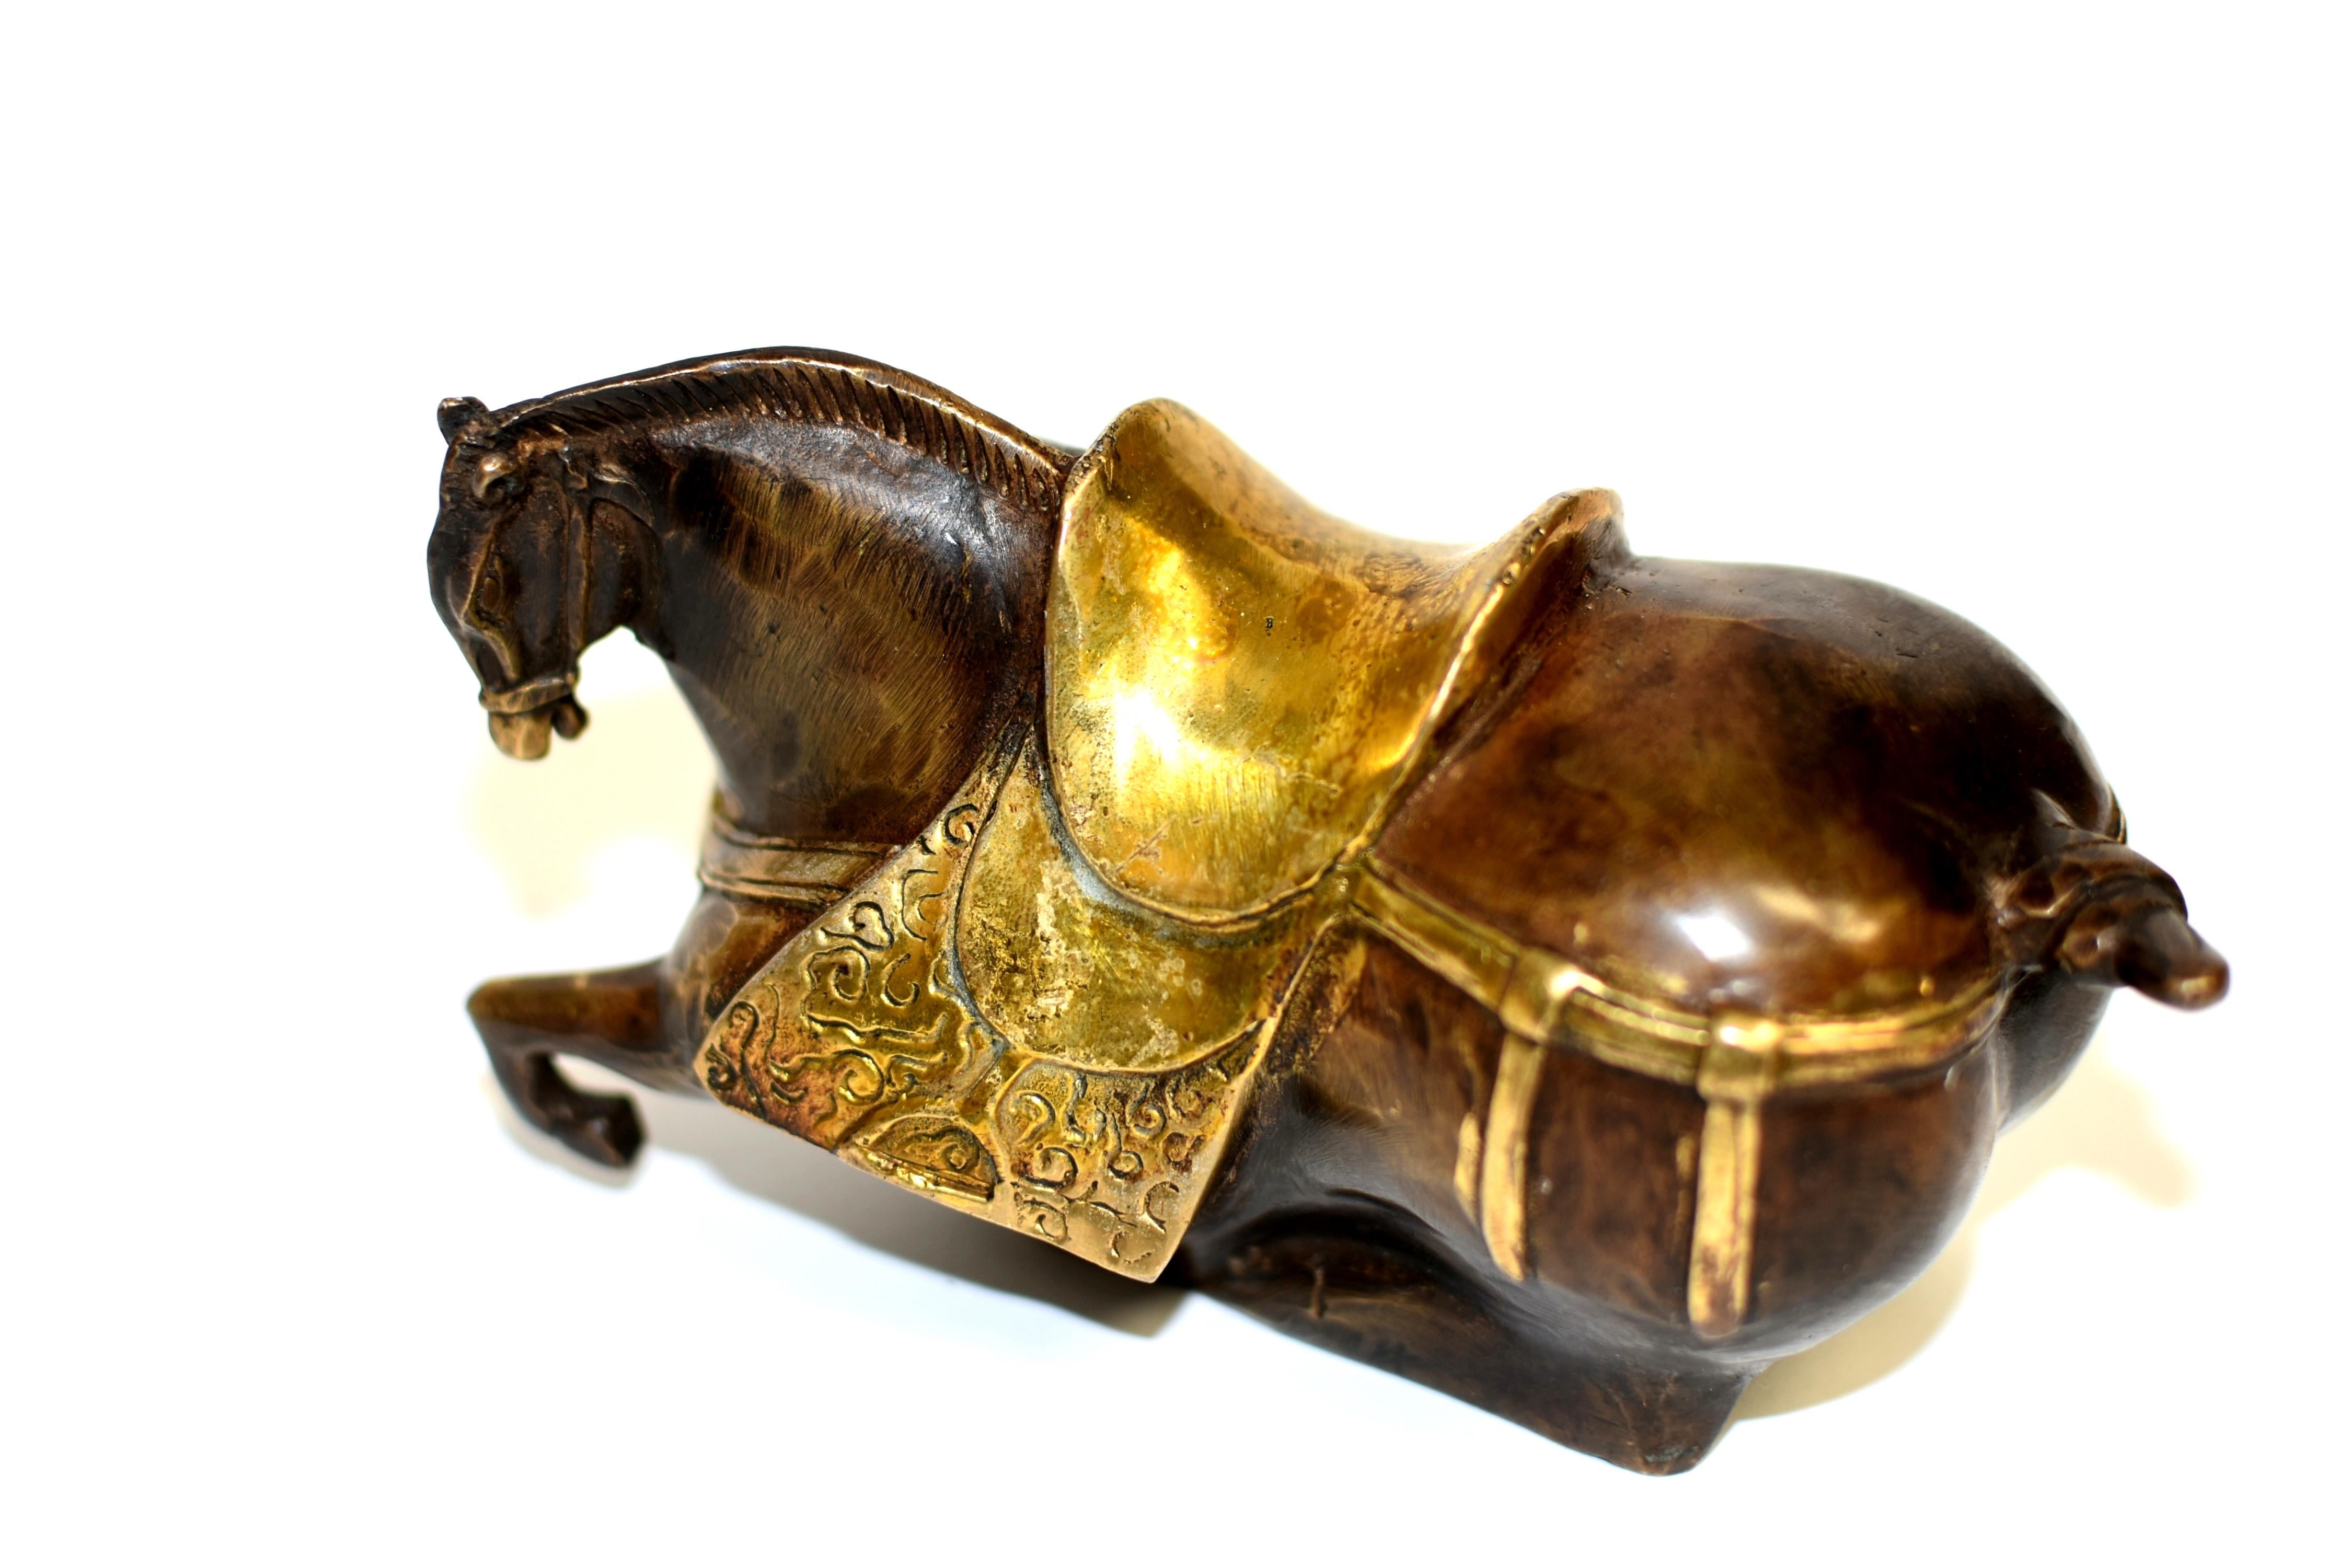 A twentieth century Han dynasty style bronze recumbent horse with three legs tucked under the body and head slightly turned. The well incised mane gathered neatly forming a ridgeline on his back behind the forward-pricked ears. The muscular body and